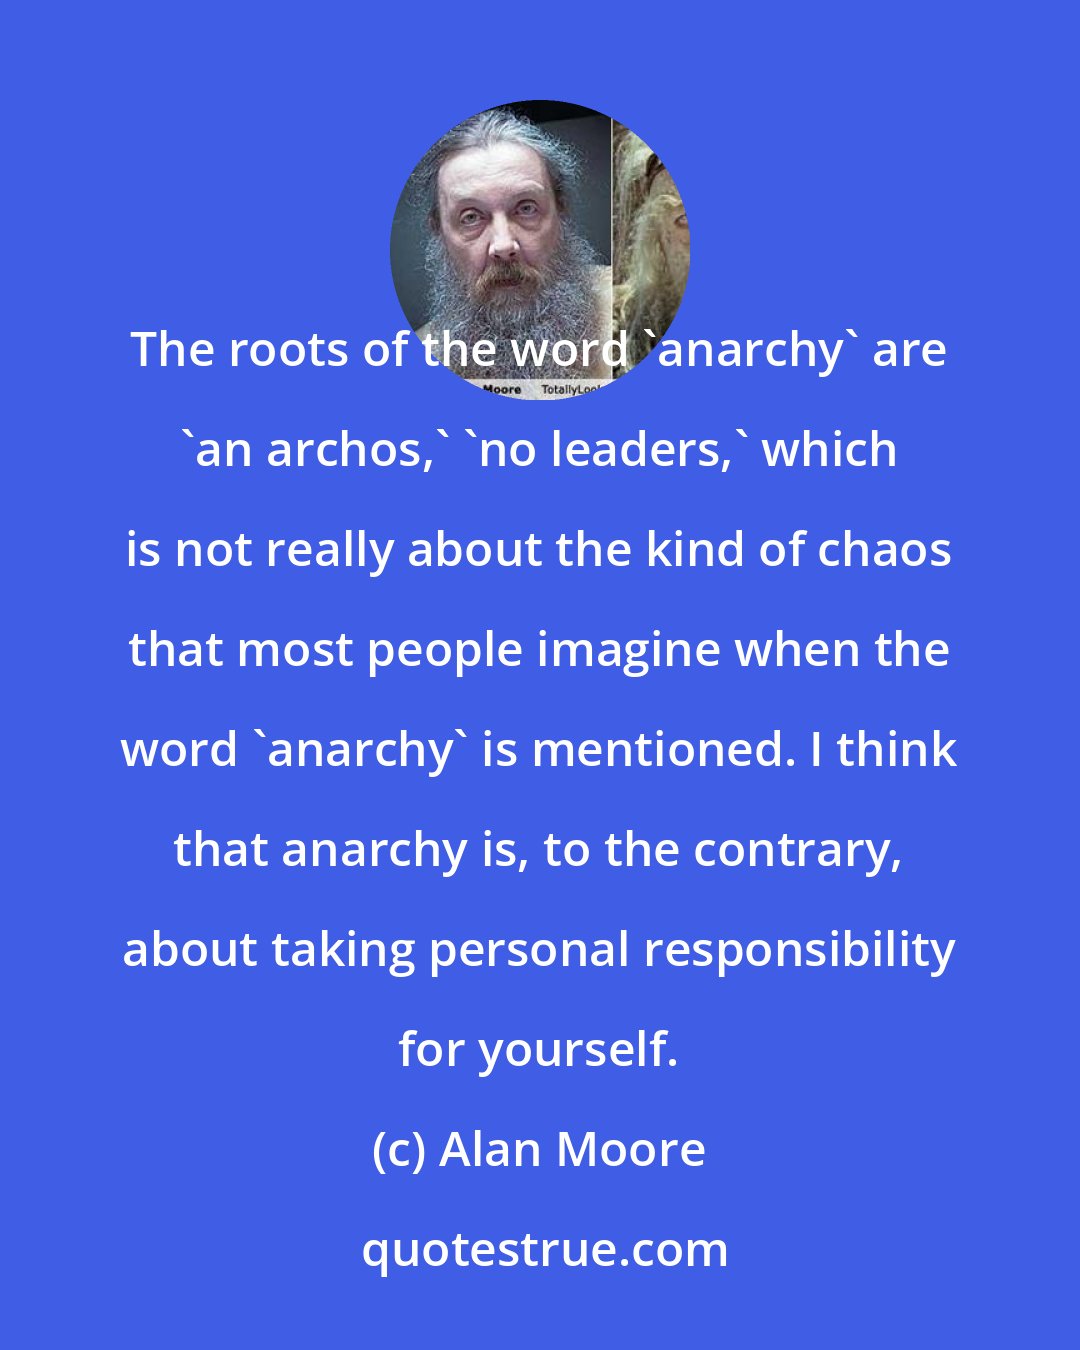 Alan Moore: The roots of the word 'anarchy' are 'an archos,' 'no leaders,' which is not really about the kind of chaos that most people imagine when the word 'anarchy' is mentioned. I think that anarchy is, to the contrary, about taking personal responsibility for yourself.